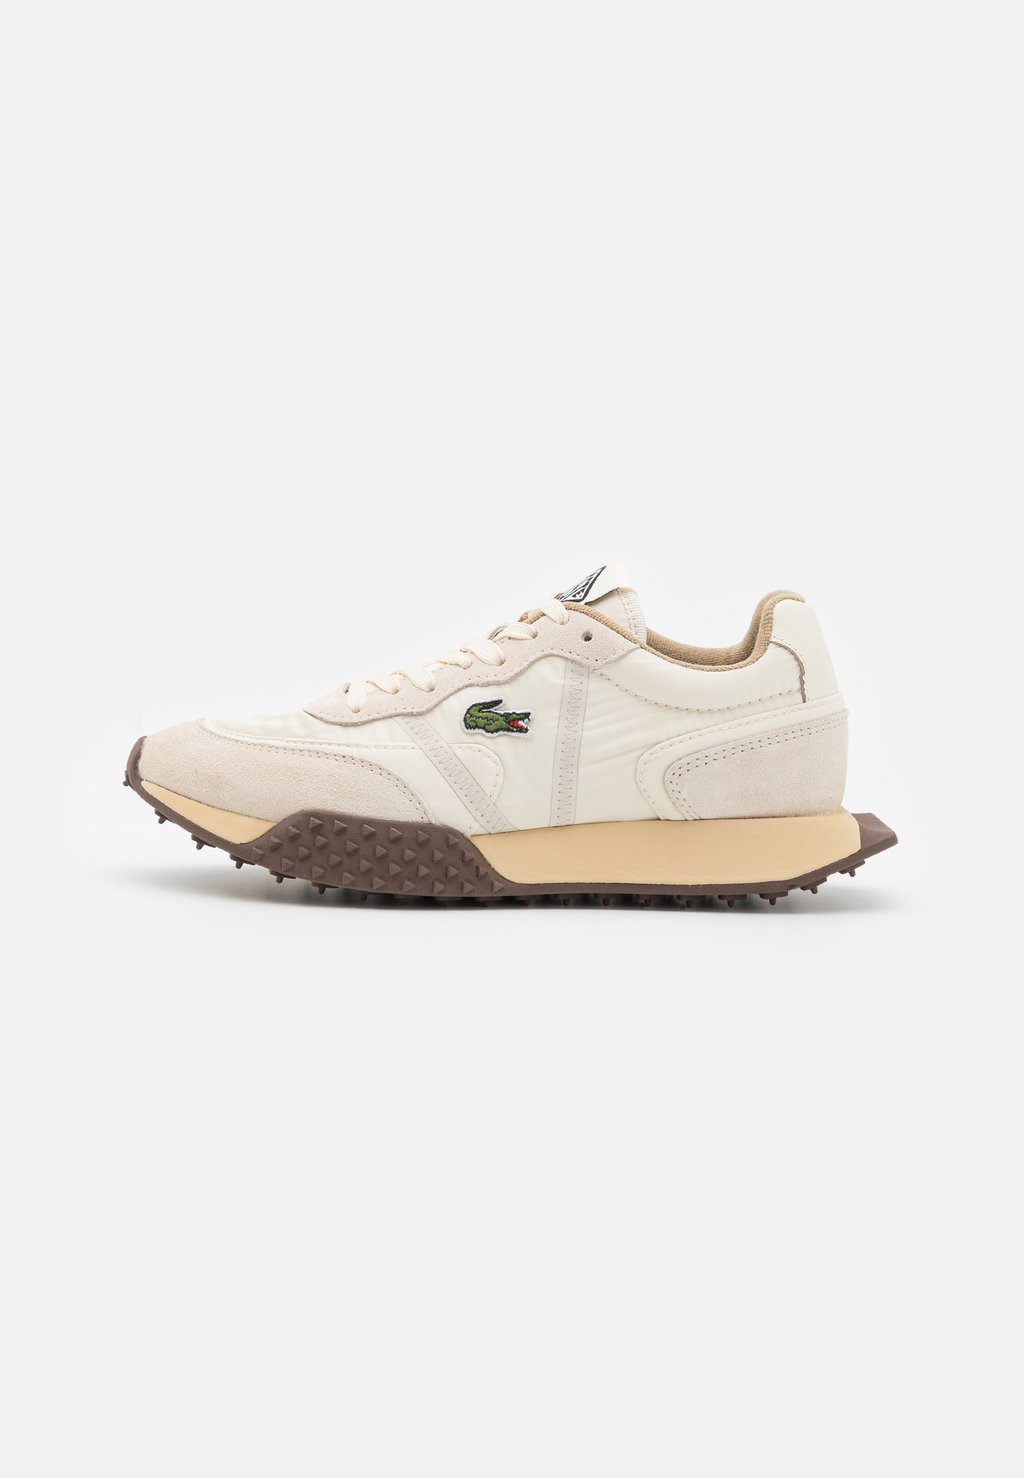 Кроссовки Lacoste L-SPIN DELUXE 3.0, цвет off white кроссовки l spin deluxe 3 0 2232sfa lacoste цвет white gum